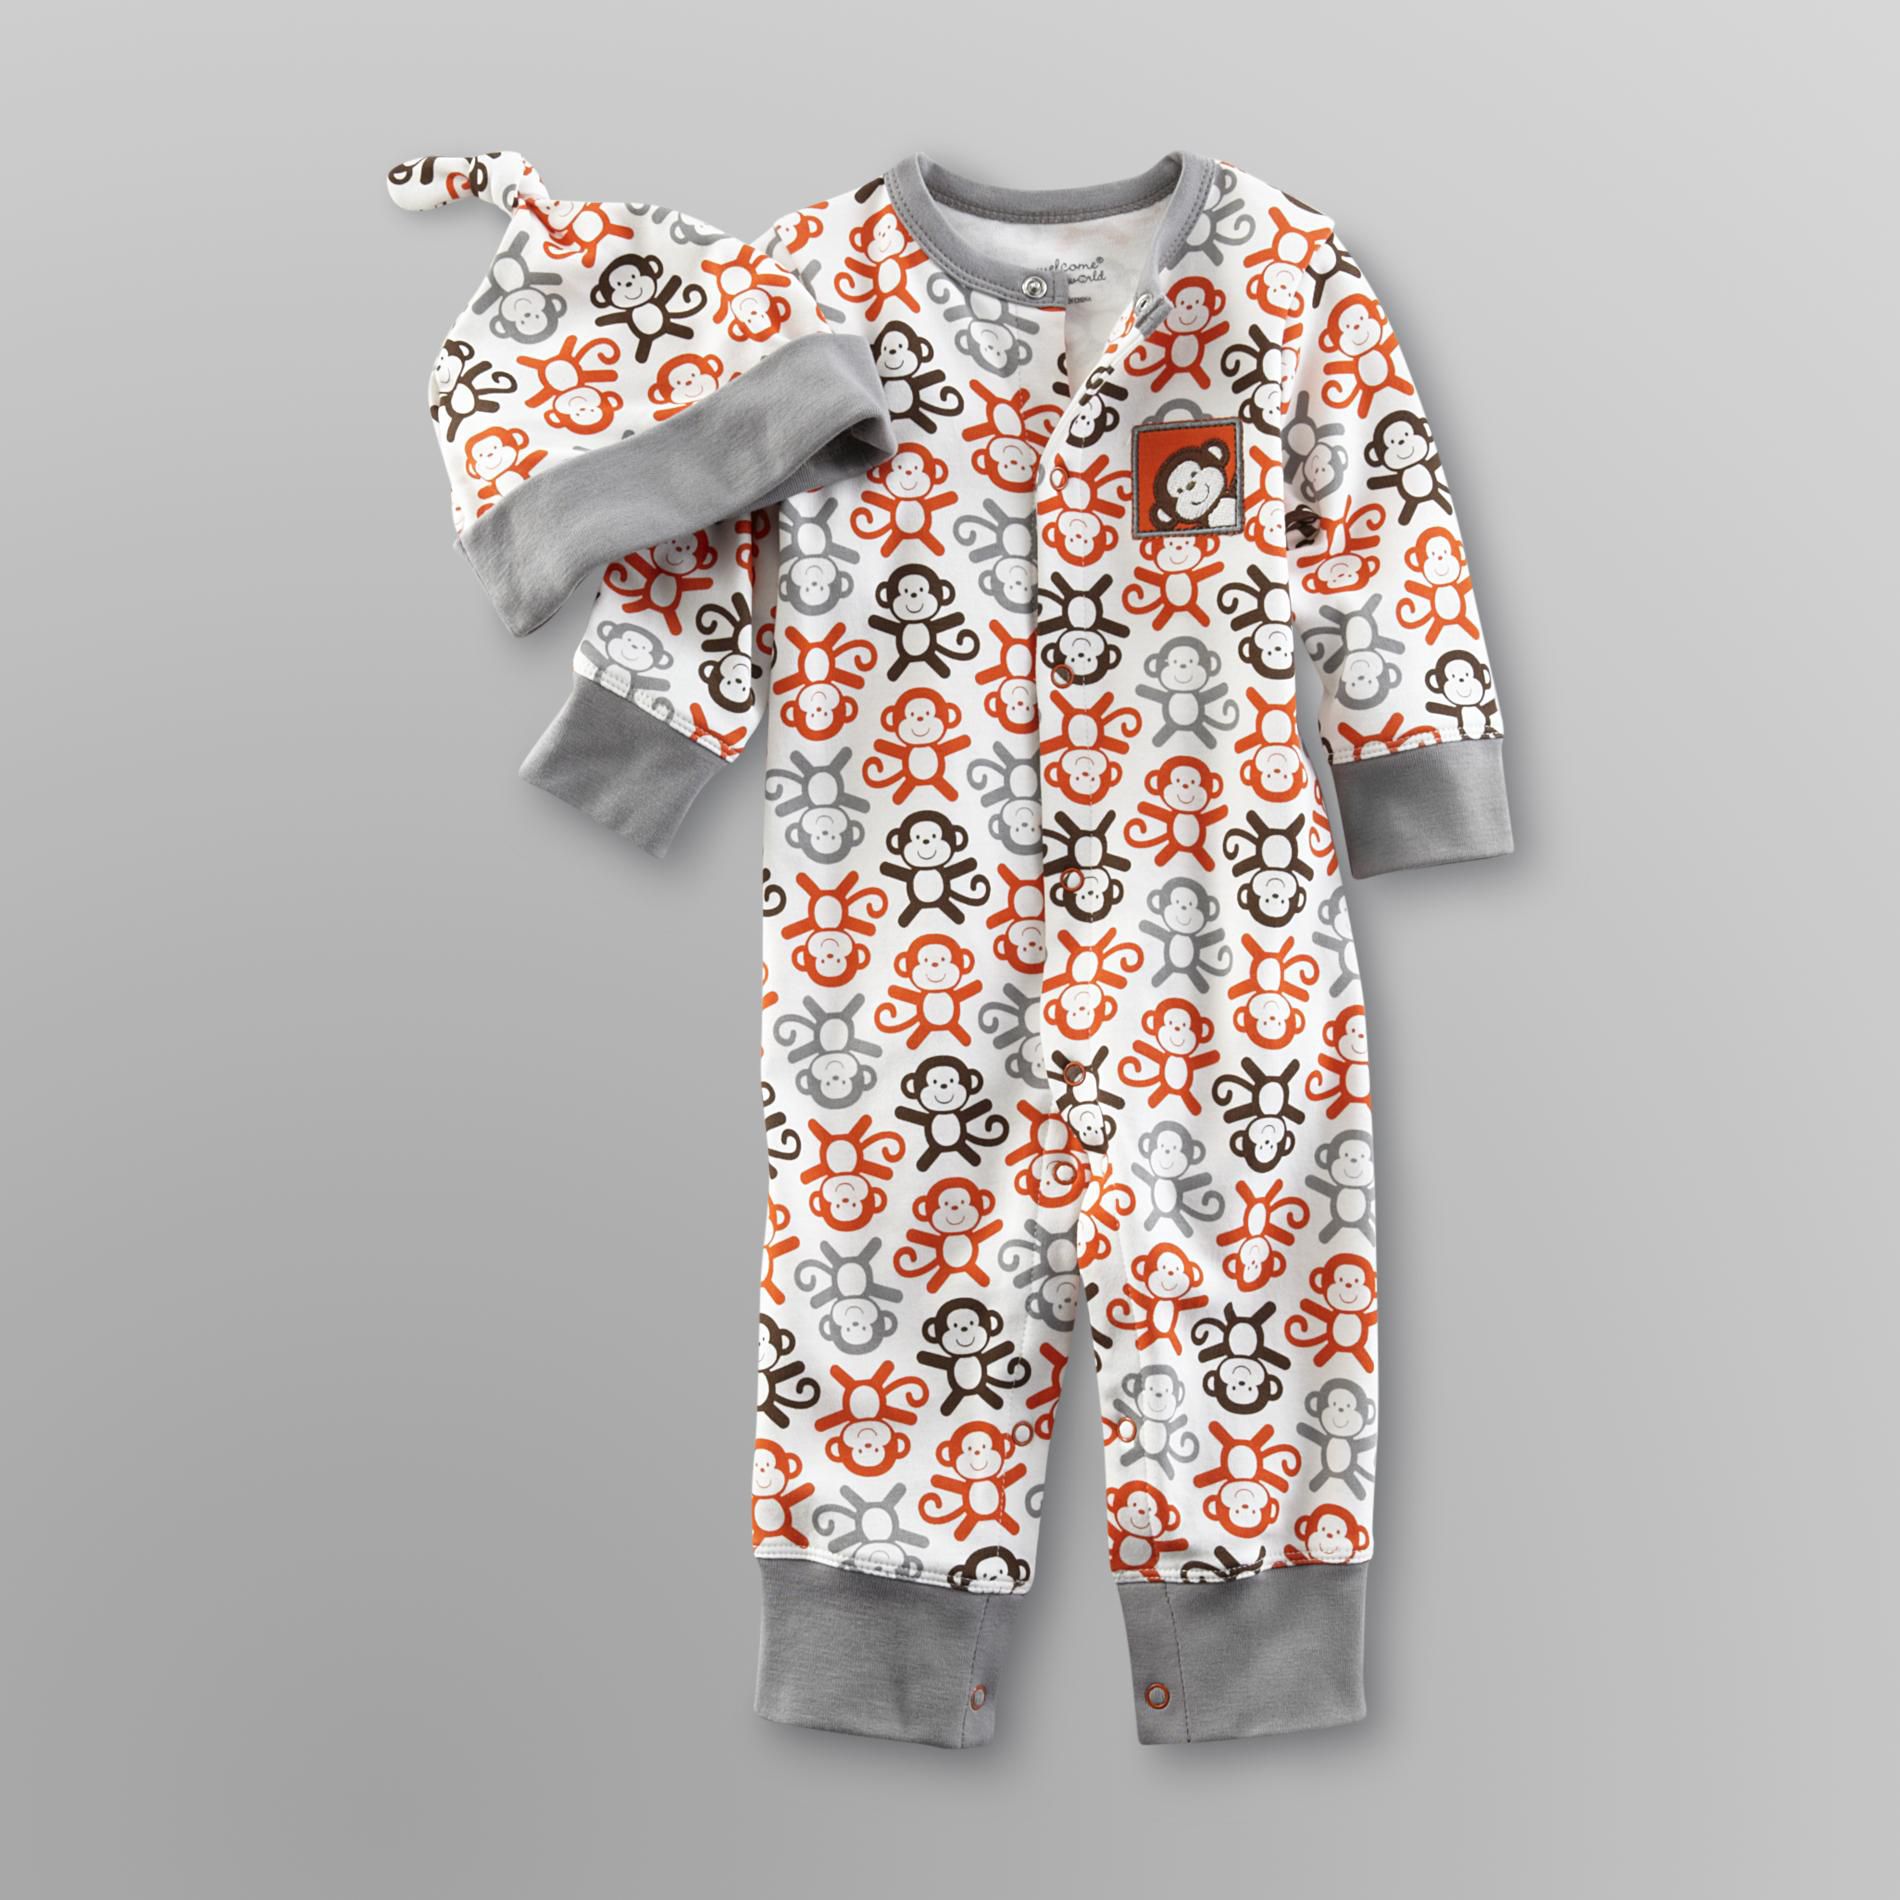 Welcome to the World Infant Boy's Jumpsuit & Cap - Monkey